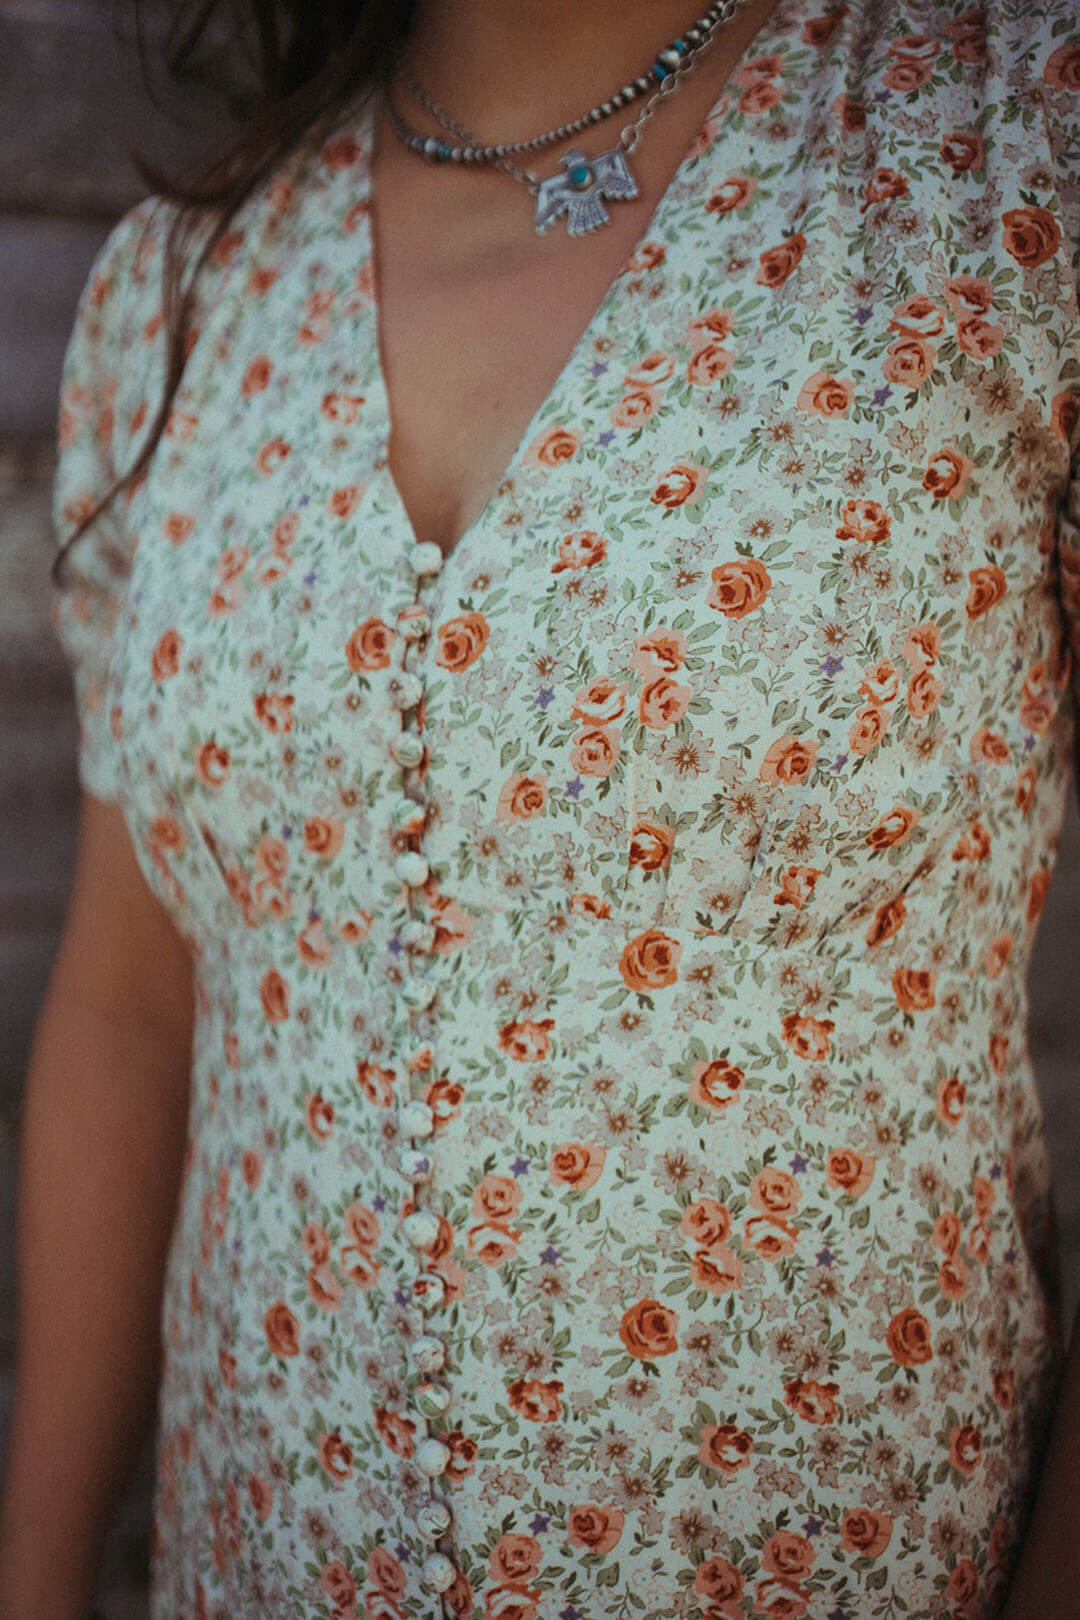 CLose up image of the Le Petit Jardin Midi Dress.  The Dress is beautiful floral colors of orange and cream.